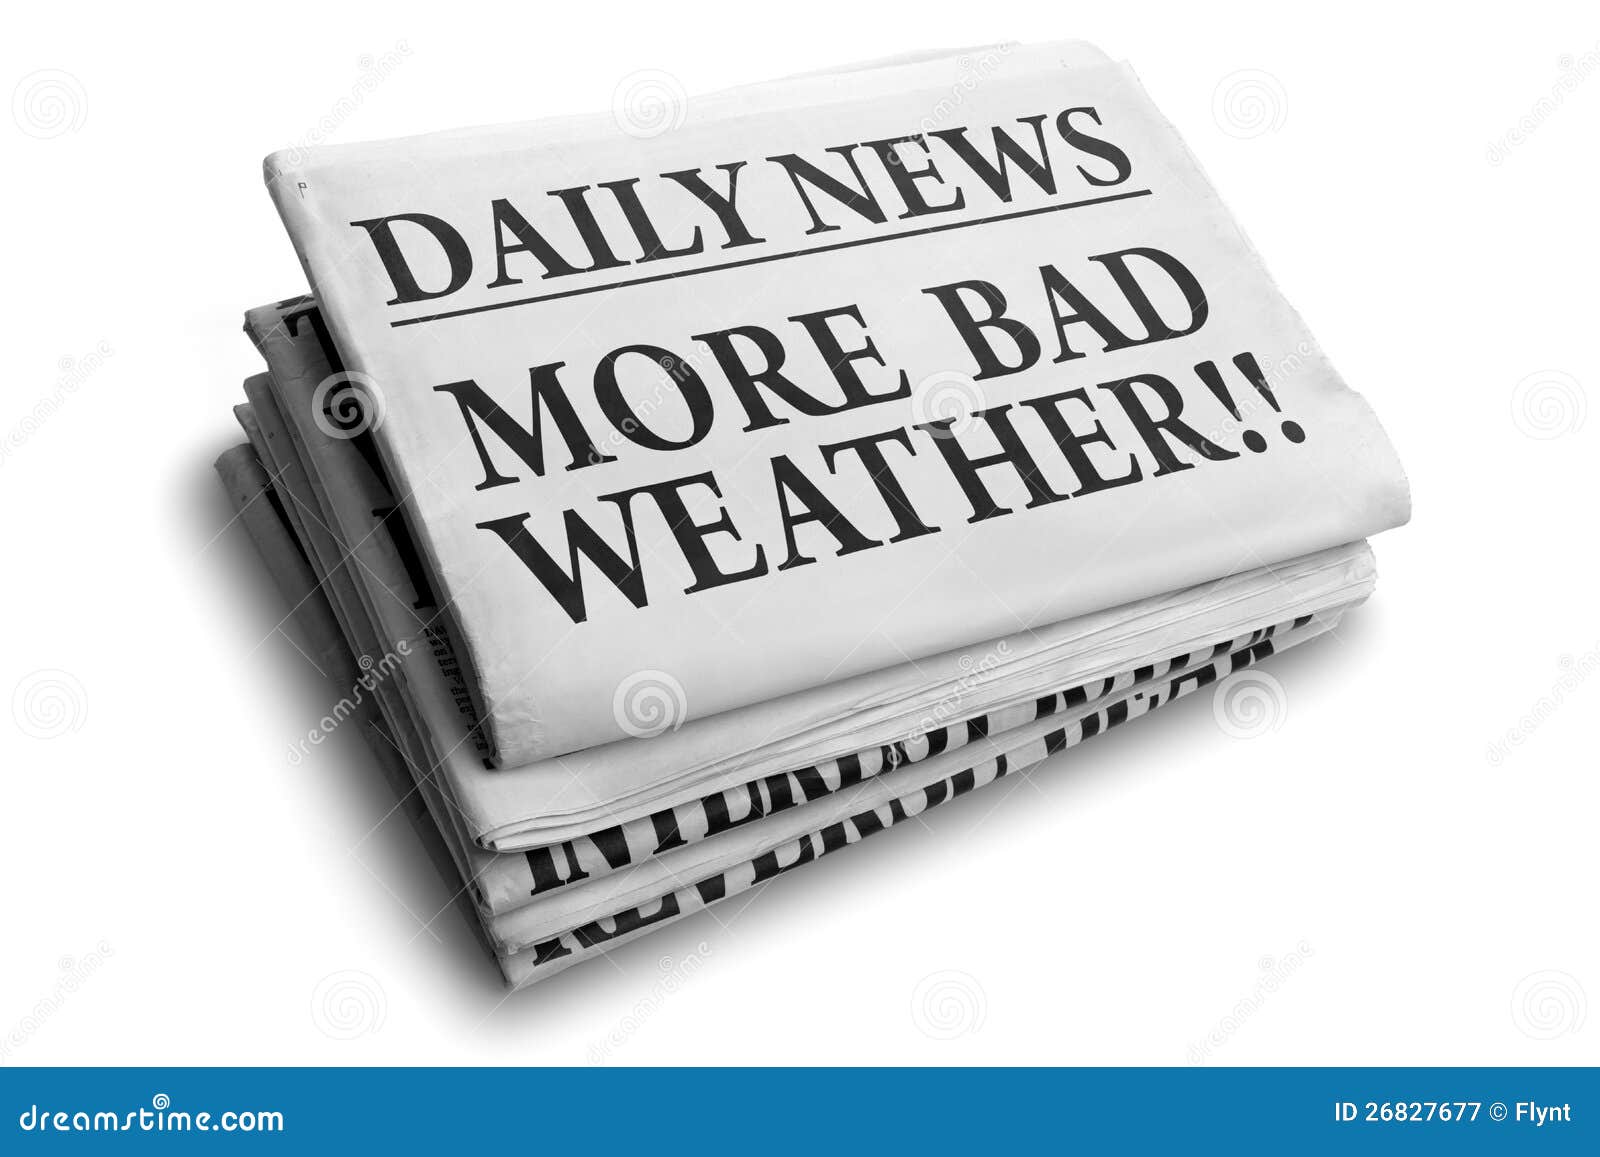 More Bad Weather Daily Newspaper Headline Stock Image ...